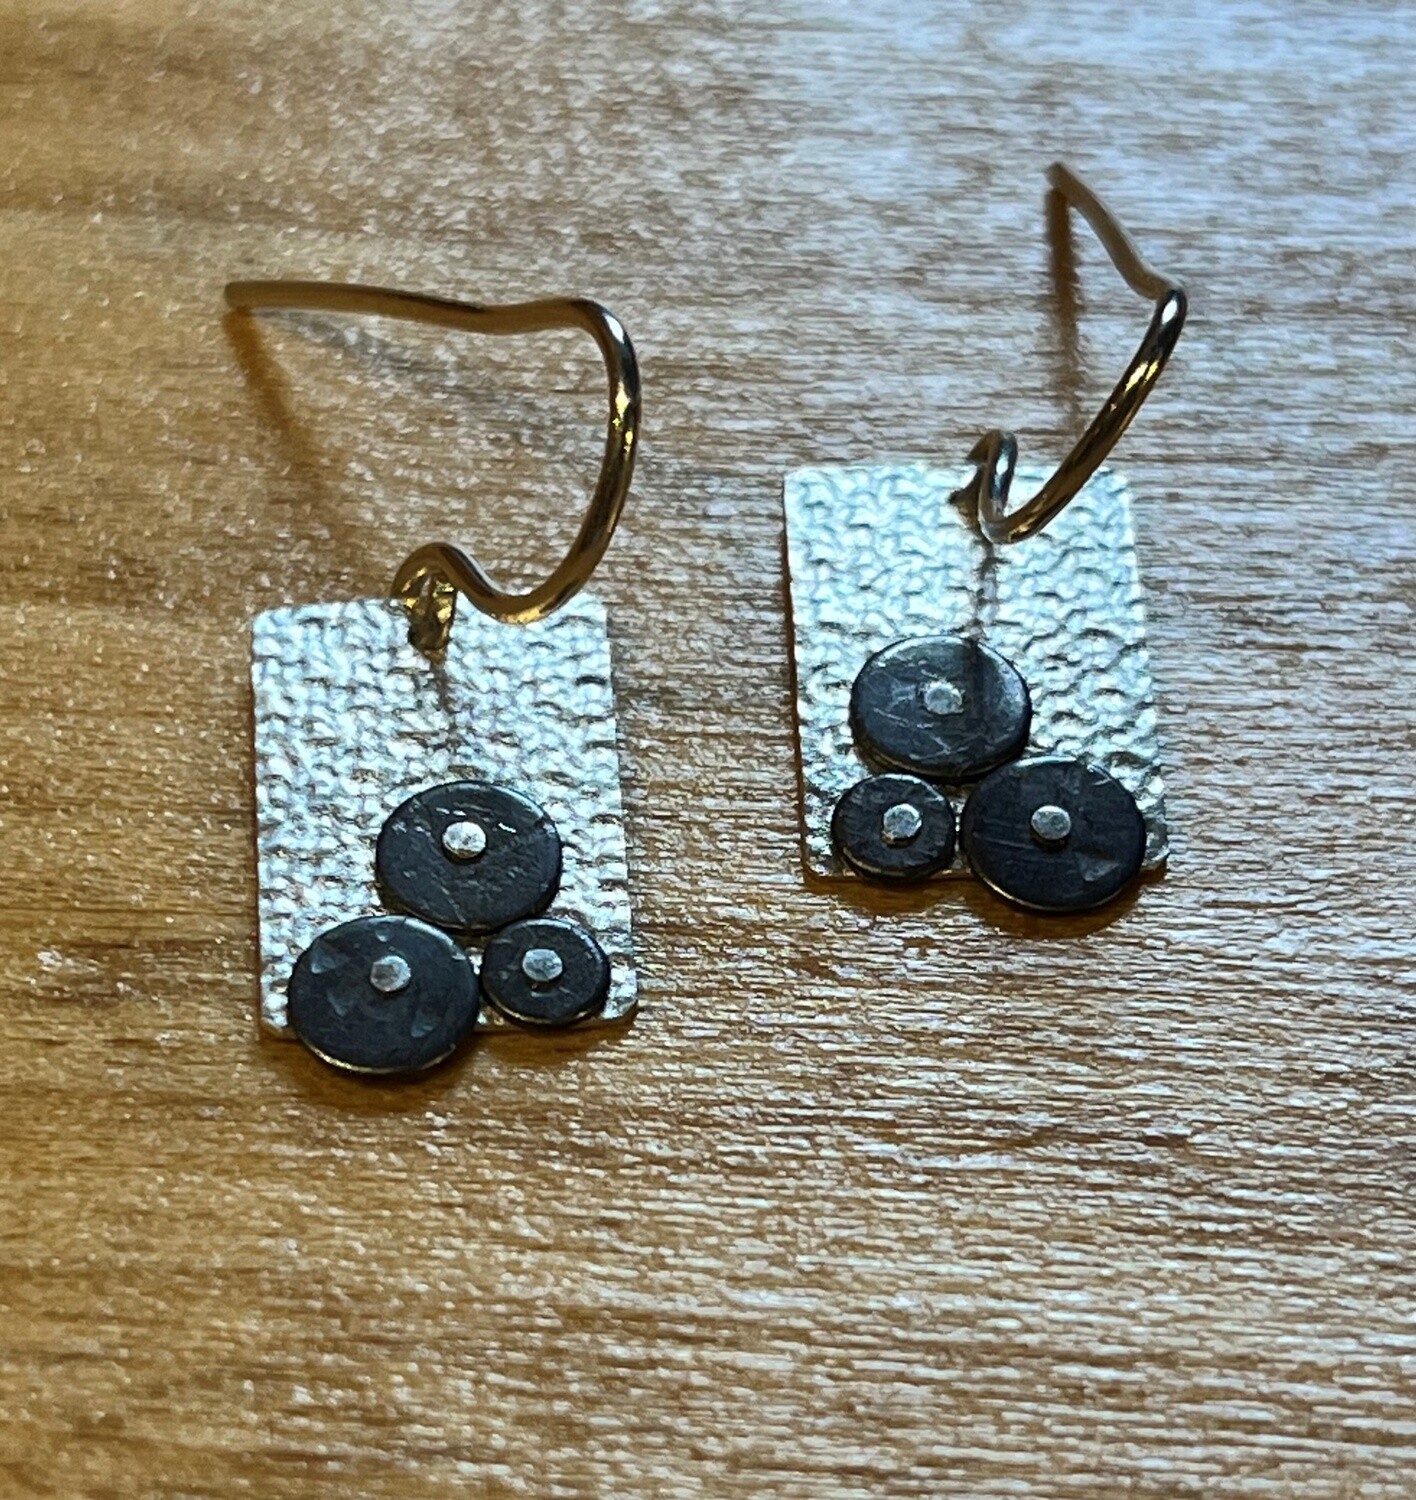 Bent Metal Earrings 3 Coins on Rectangle